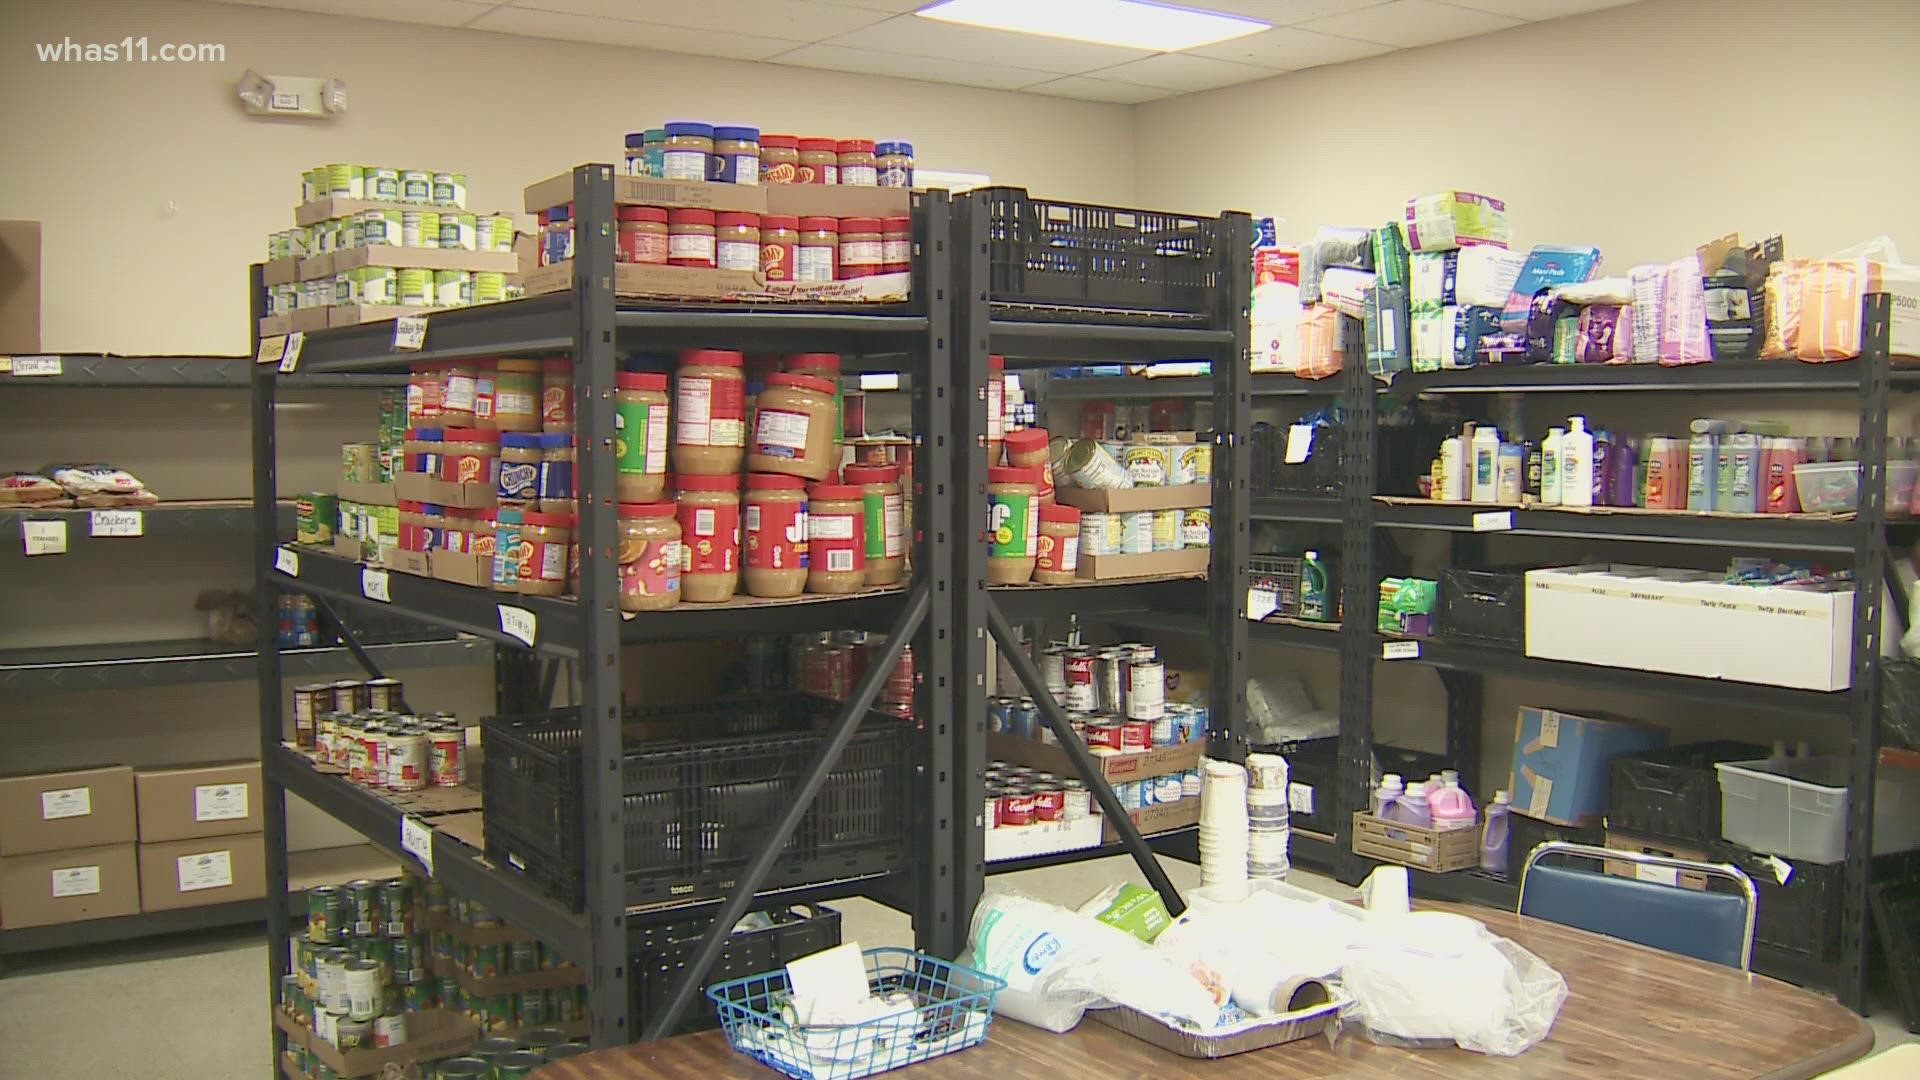 Jeffersontown Area Ministries said it has seen a 50% increase in need since the start of the coronavirus pandemic.